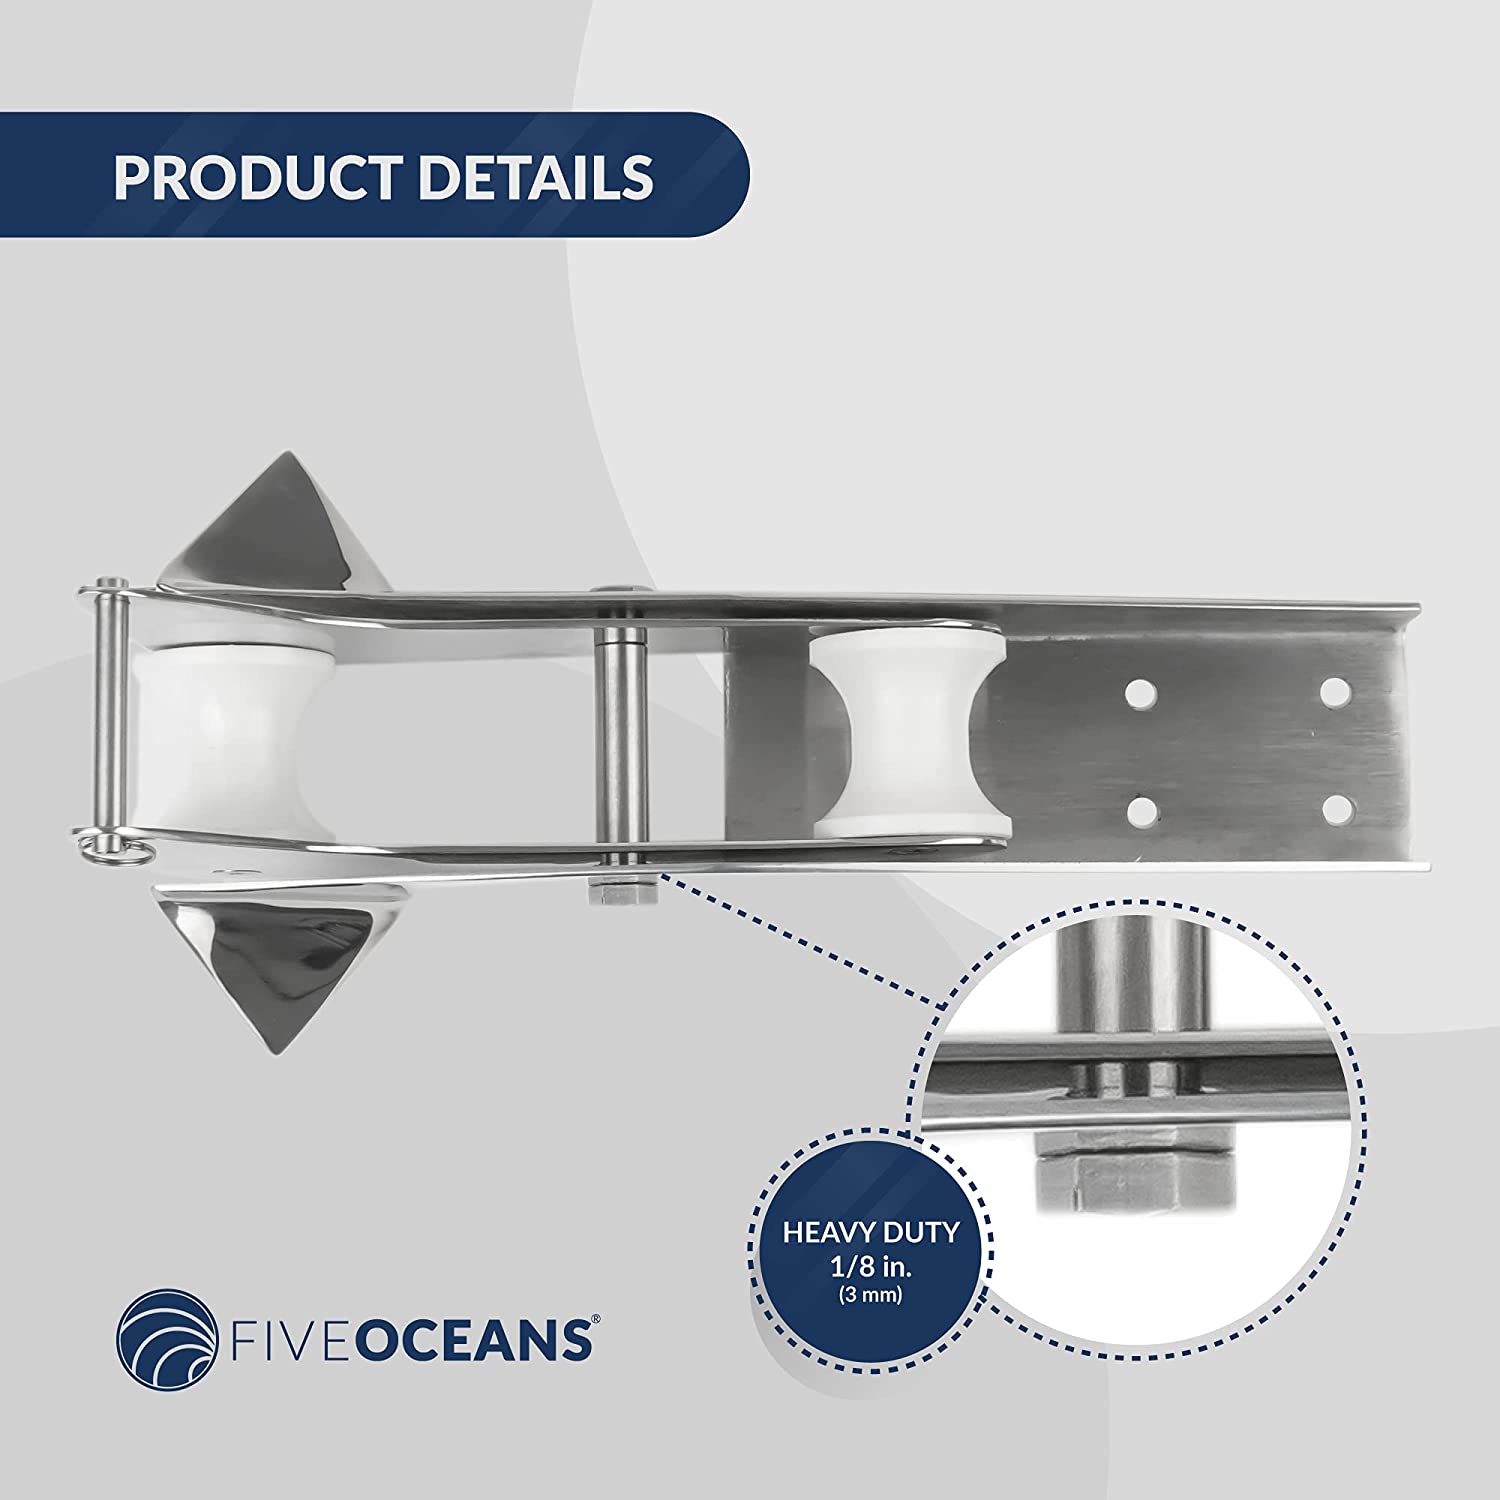 Five Oceans Self-launching Anchor Bow Roller 13-1/8 in. AISI316 Stainless Steel FO-73-Canadian Marine &amp; Outdoor Equipment